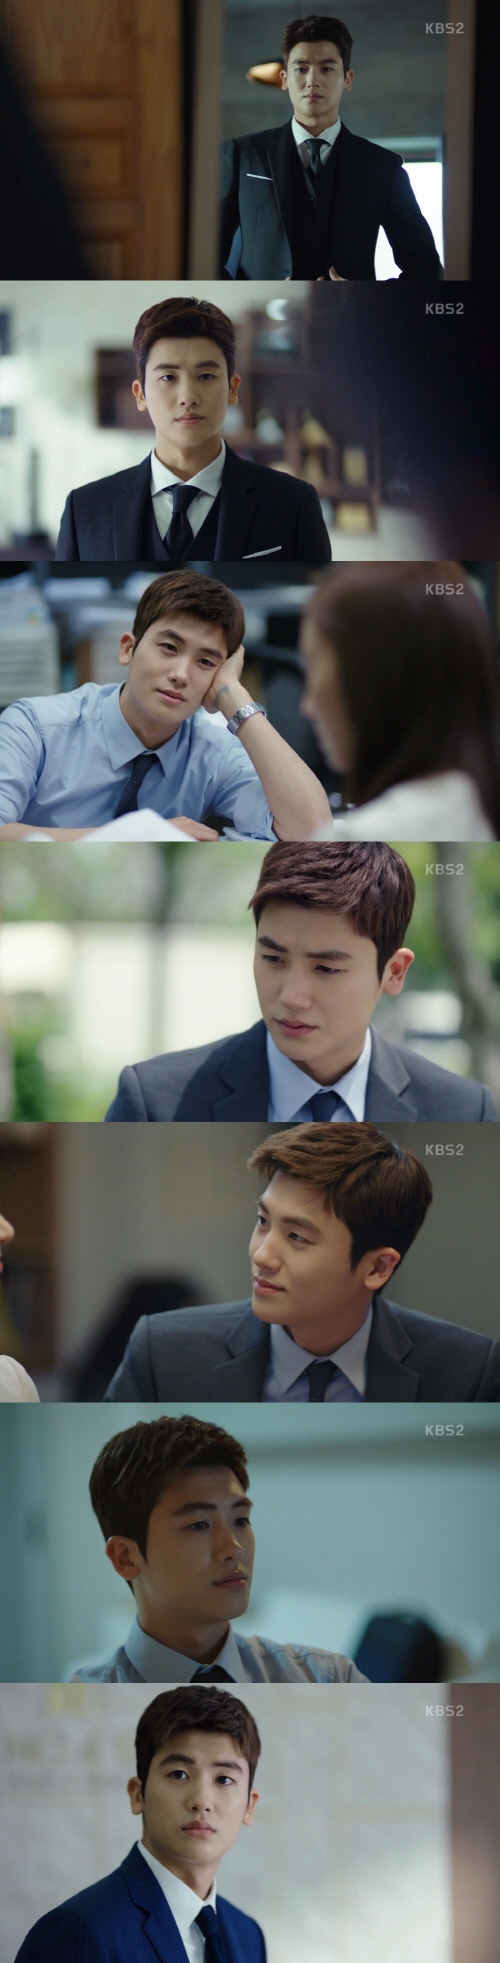 The growth of Suits Park Hyeong-sik captivated viewers.There are many words that explain KBS2 drama Suits.Jang Dong-gun and Park Hyeong-siks all-time bromance character play drama, unpredictable chemistry drama, and so on.However, from the standpoint of Park Hyeong-sik, Suits is definitely a growth drama.Ko had a genius matching king and empathy.The lawyer was a dream and capable, but the world did not give him a chance and it was like a cloud that the lawyer could not catch.In the end, Ko was rotting his abilities and living every day as a parking agent, such as a grandmother in the hospital, a reality that she could not see any signs of improvement.The weight of life that Ko had to bear was difficult.The 11th Suits, which was broadcast on the afternoon of the 30th, showed the growth of Ko Yeon-woo perfectly, crossing the most pleasant and serious.The reason for entering Kang & Ham was given the first single case to Ko Yeon-woo, who became a formal lawyer, showing remarkable growth.In the process of solving the first single case, Ko showed his own special perspective and approach, and he did it.The most eye-catching thing was the change of Ko Yeon-woo, who wore a nice suit that fell from head to toe before the first single case.And he even wore shoes that could be called symbolic, which means that Ko Yeon-woo, who wore sneakers even if Choi Kang-seok said several times, wore shoes.The change in appearance is not all that matters: it solves the case without losing its own color and merits, which means that as a lawyer, the high-ranking has also changed and grown.Unlike the past, when a genius matching king simply memorized the code, he was able to face and solve the case alone without the help of Choi Gang-seok.Park Hyeong-sik led the drama, sometimes expressing the growth of this high-ranking actor brightly and pleasantly, sometimes seriously and coolly.Ko Yeon-woo, who is trying to follow his mentor, Choi Gang-seok, is pleasant, but he is drawn seriously and coolly, which is not his will and will but his own way.Park Hyeong-siks sensual acting, which changes organically according to the story, was a poisonous turn.In addition, Park Hyeong-siks other aspect shone in the change of relationship with Kim Ji-na (Go Sung-hee).Even if you do not have a lot of stories, it is a charm that captures deep feelings and many stories with just eyes.Thanks to this, viewers could feel the excitement of Park Hyeong-siks eyes.